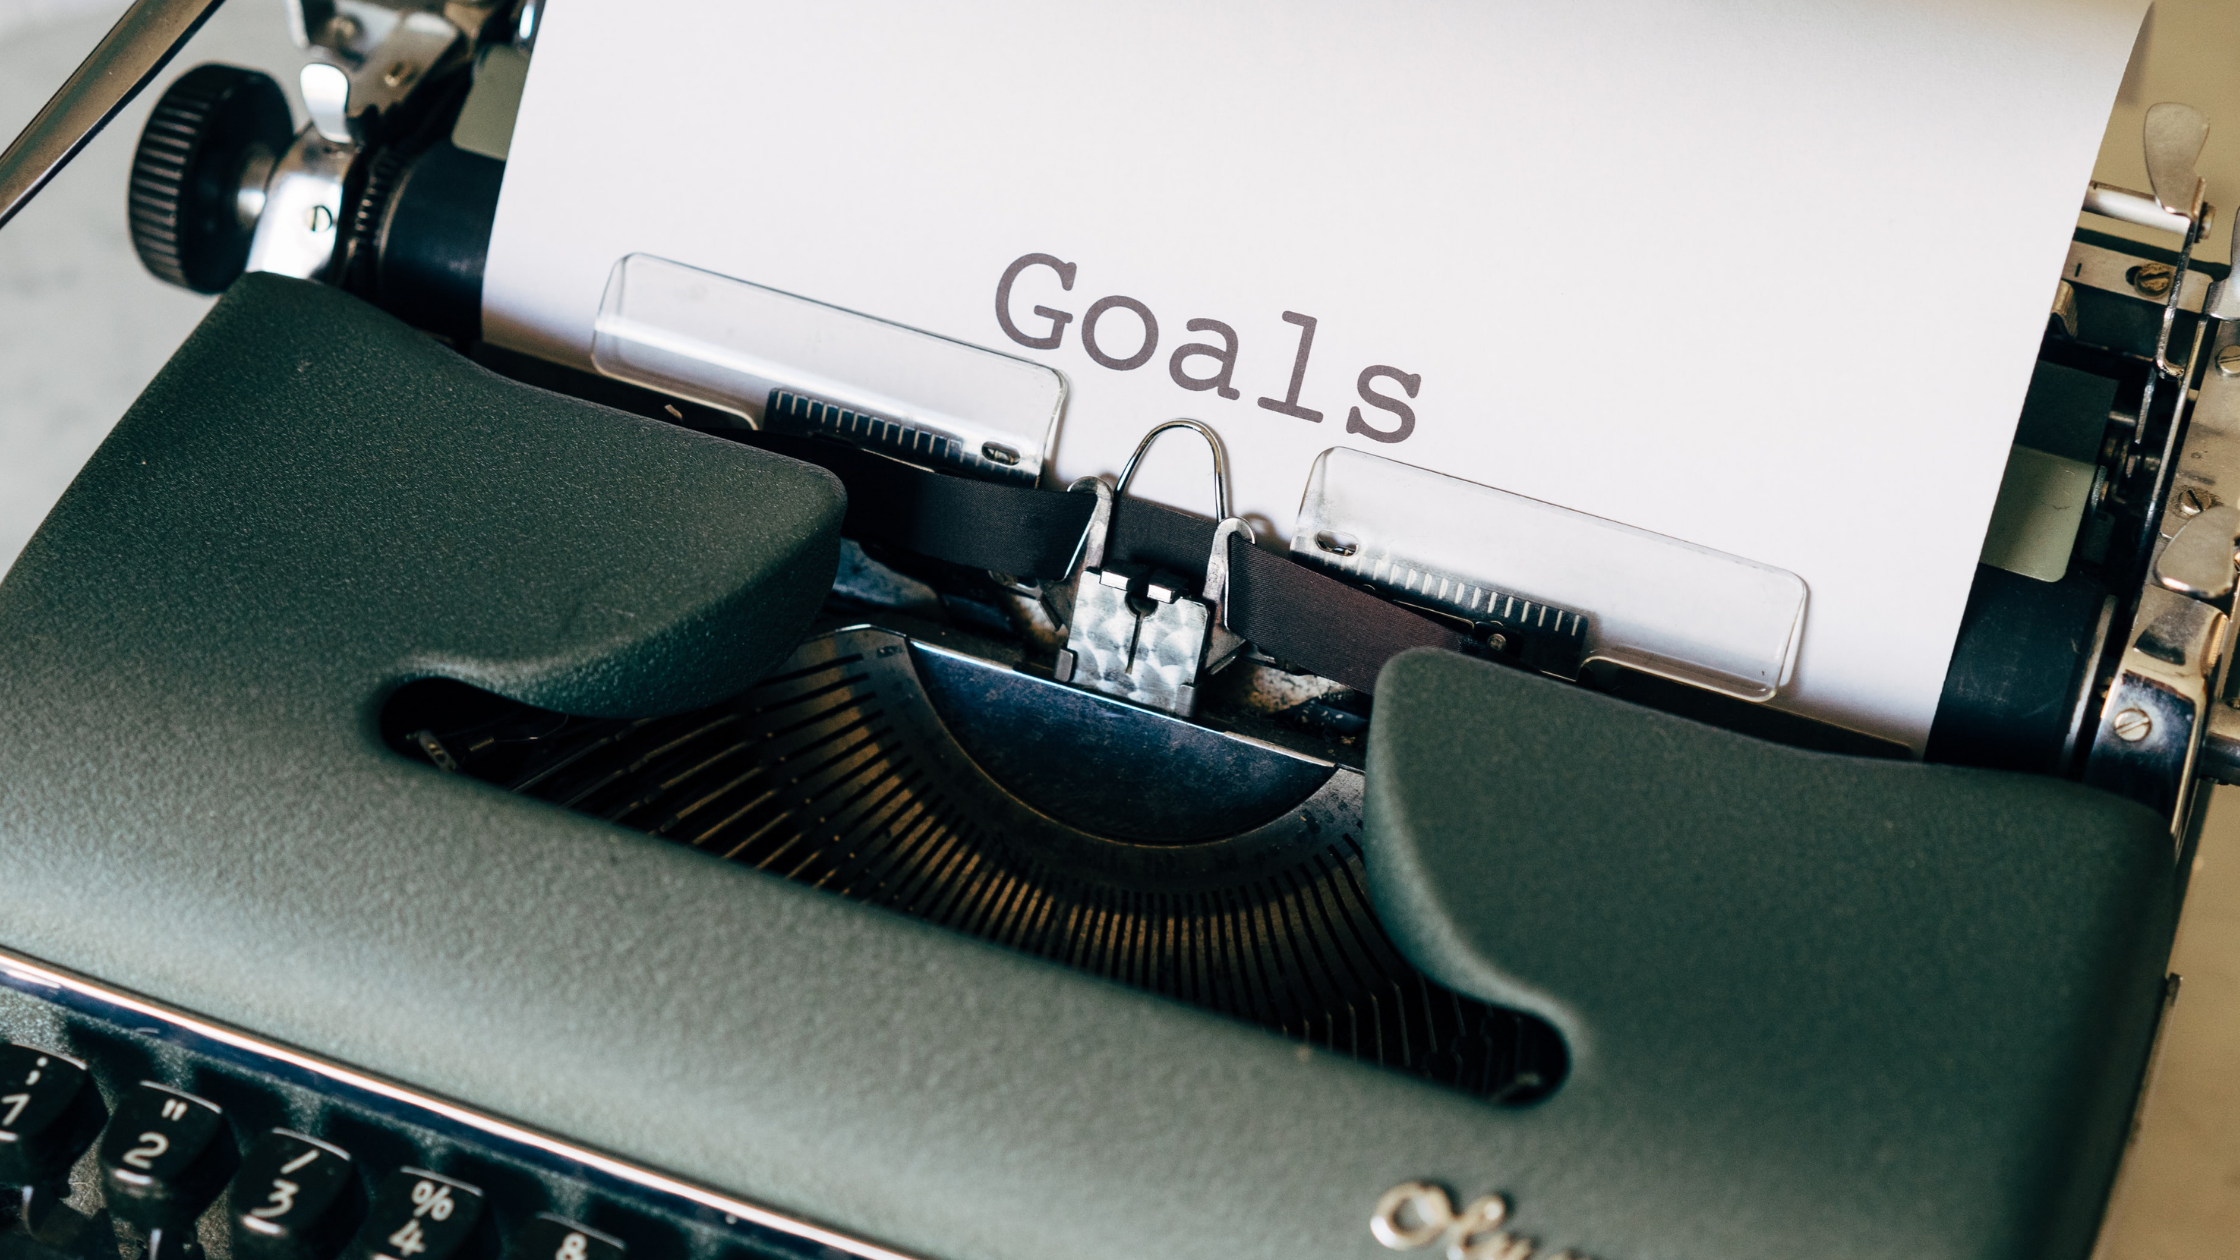 Using Smart Goals To Get Back On Track